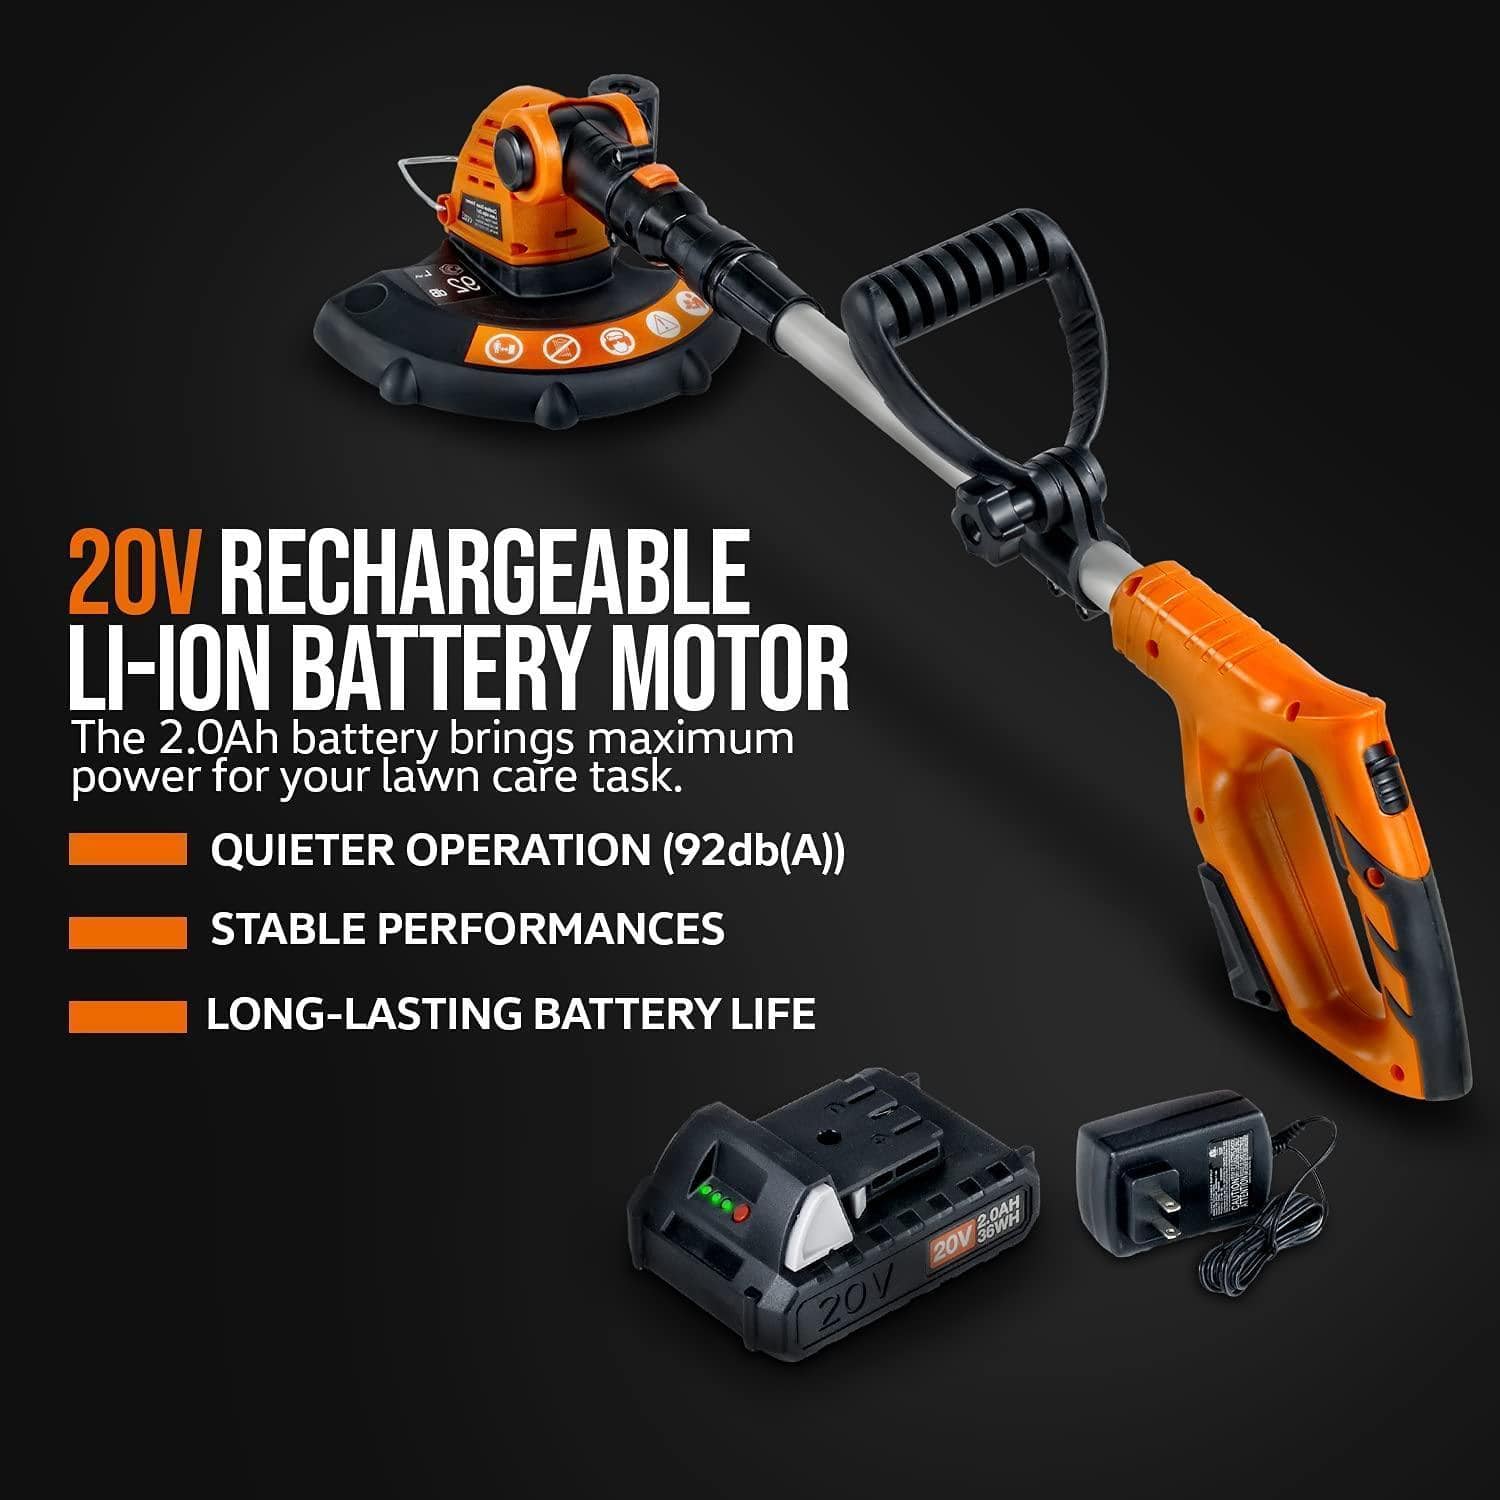 SuperHandy 2-in-1 Lawn Edger & Weed Wacker - 20V 2Ah Battery System, Removable Battery, Telescopic